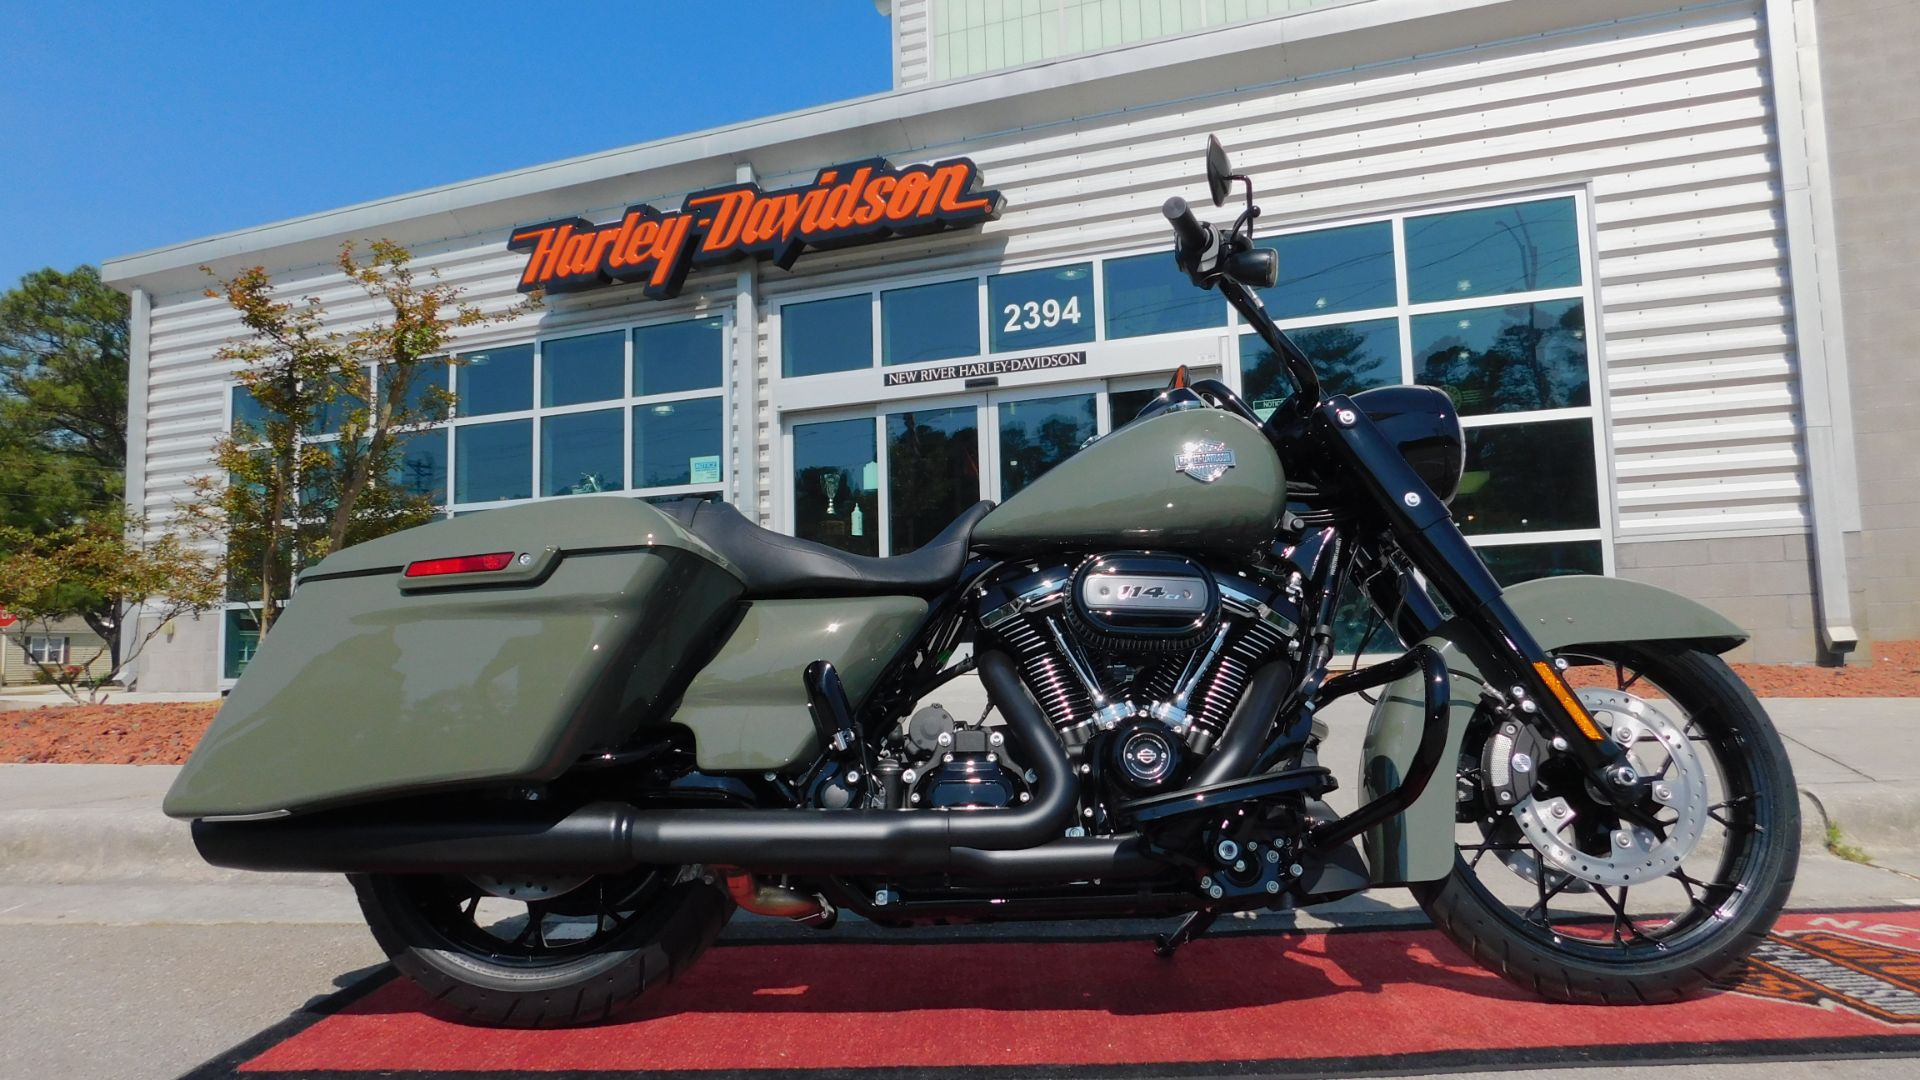 New 2021 Harley Davidson Road King Special Motorcycles In Jacksonville Nc Nrhd9895 Deadwood Green